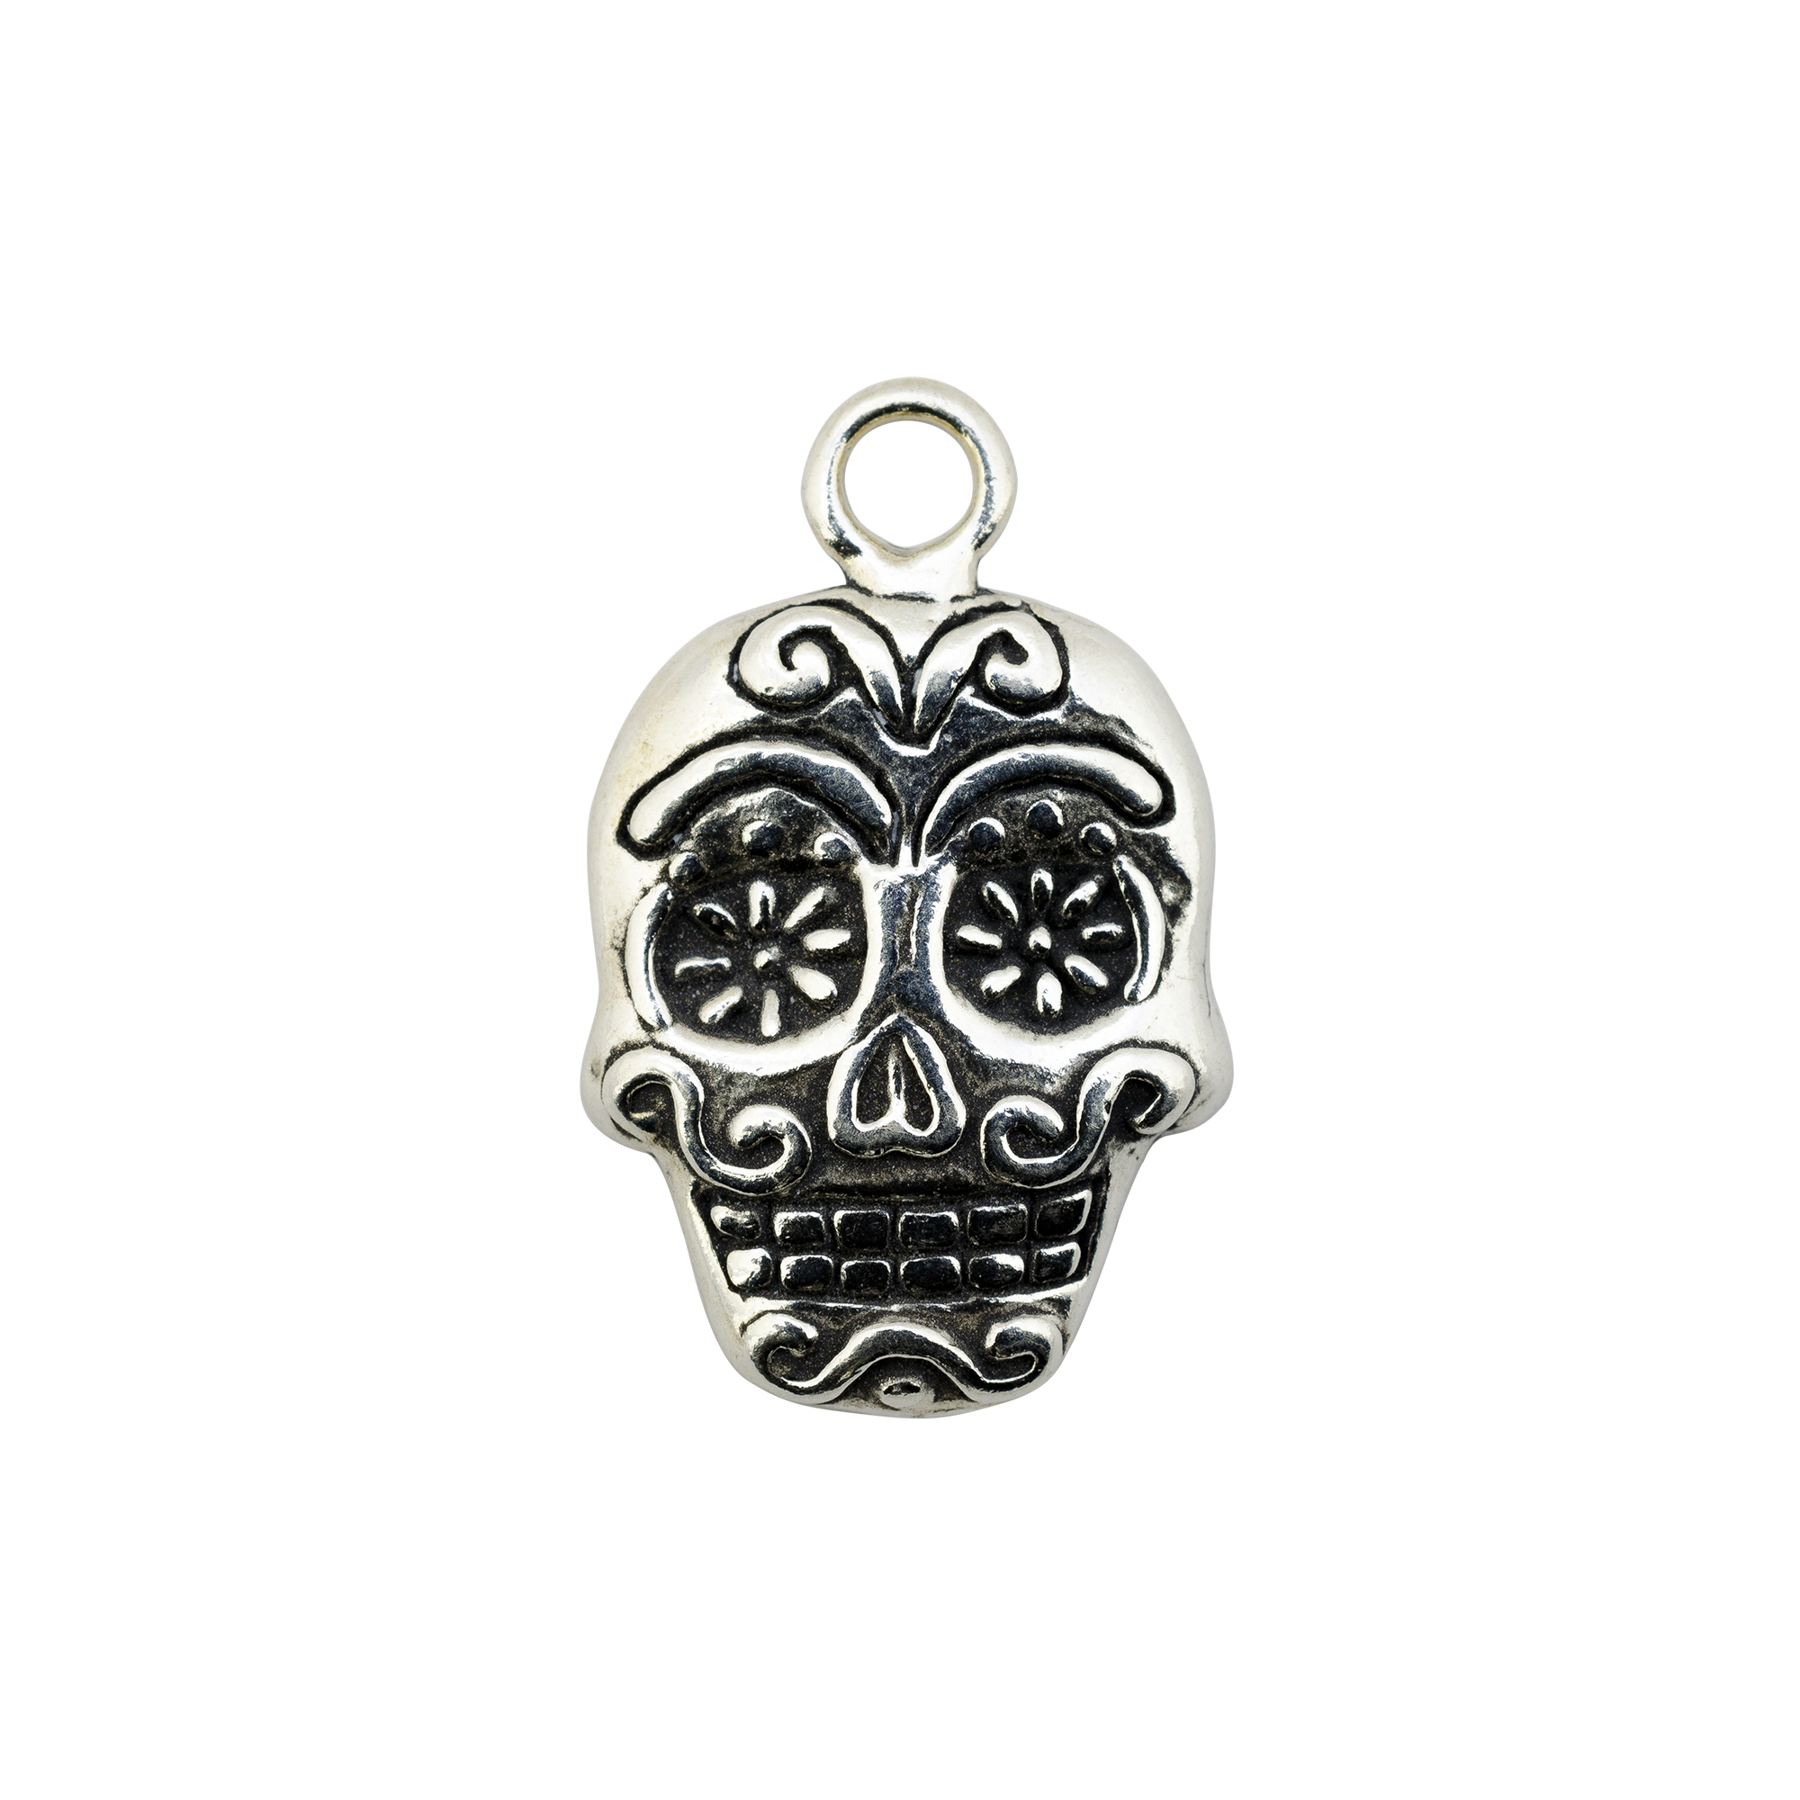 Silver Sugar Skull Charms | Day of The Dead Pendant | Mexican Halloween Jewelry Making | Silver Charm Supplies (3 Pcs / Tibetan Silver / 27mm x 27mm)